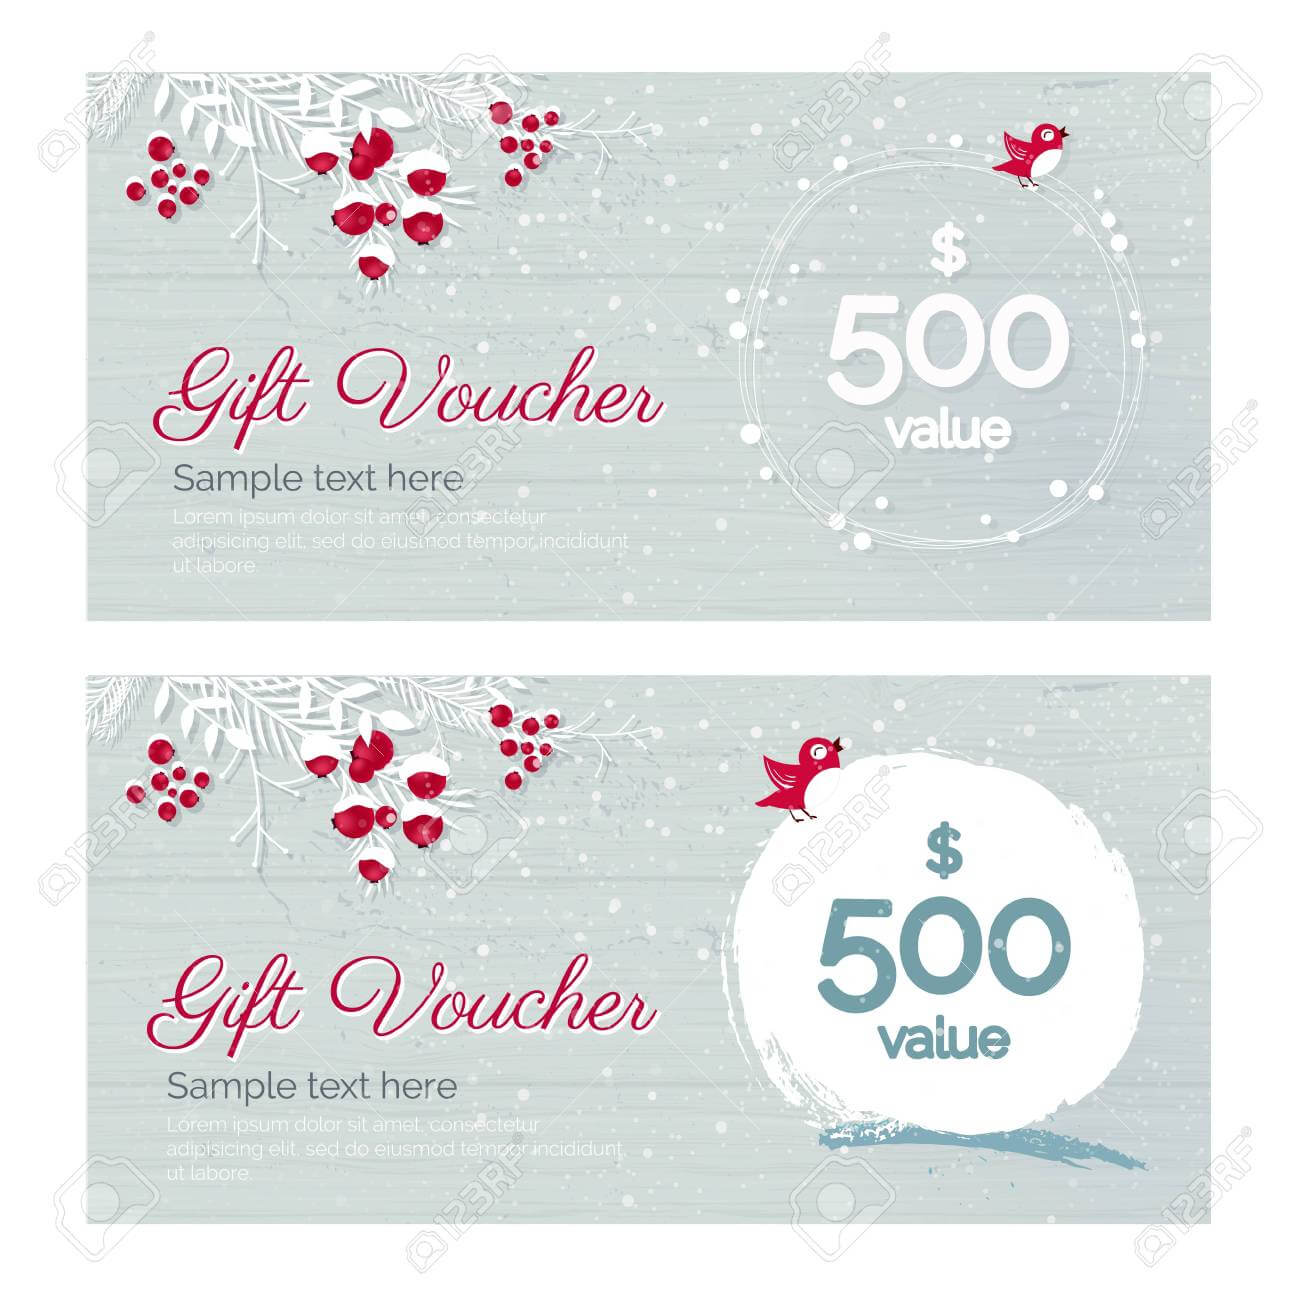 holiday-gift-voucher-template-download-in-word-illustrator-psd